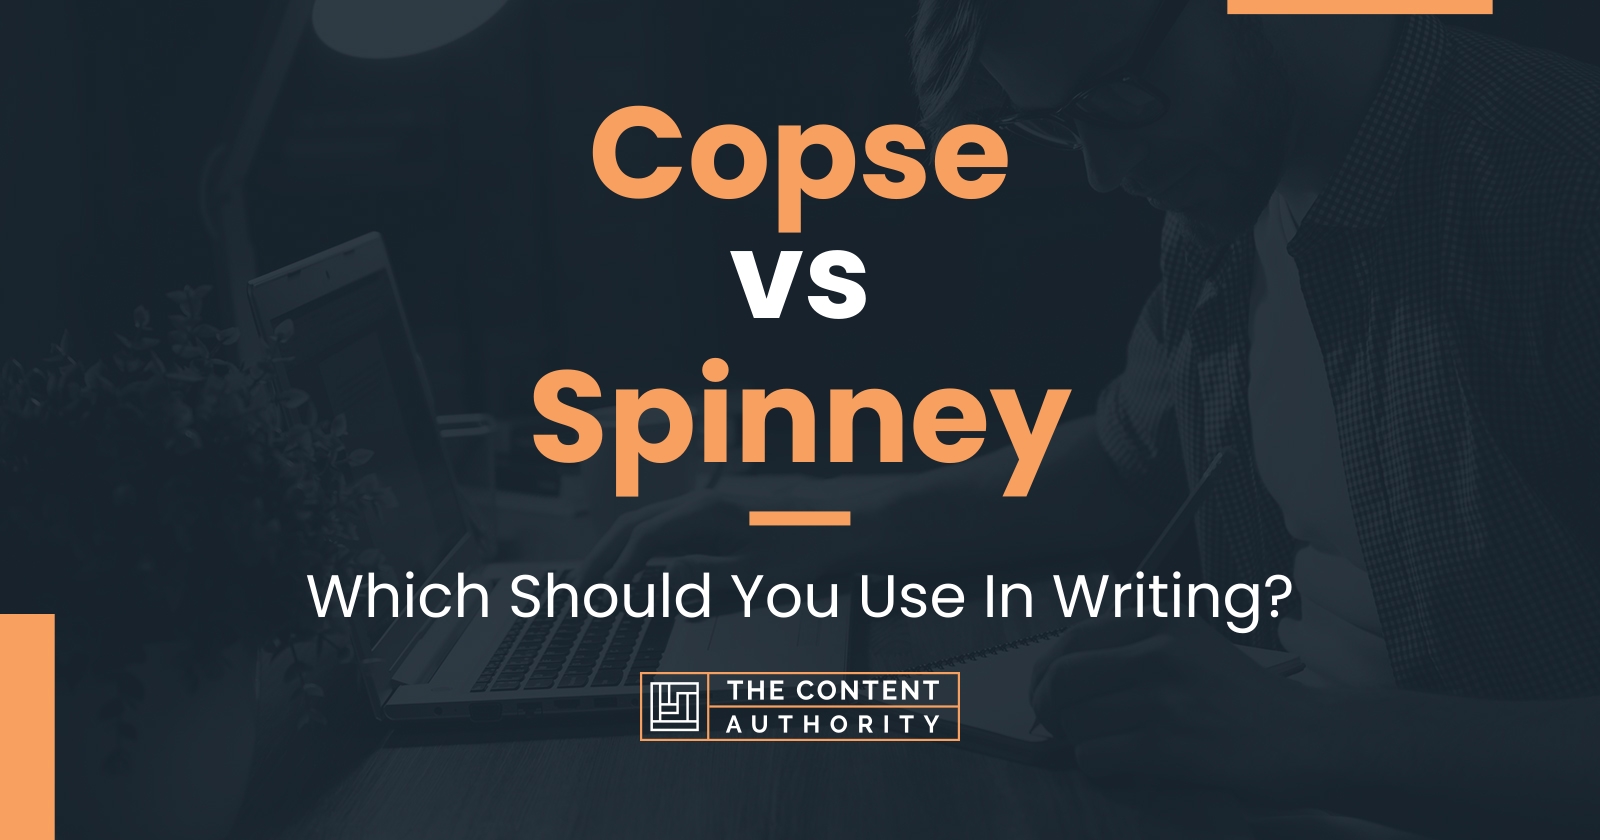 Copse vs Spinney: Which Should You Use In Writing?